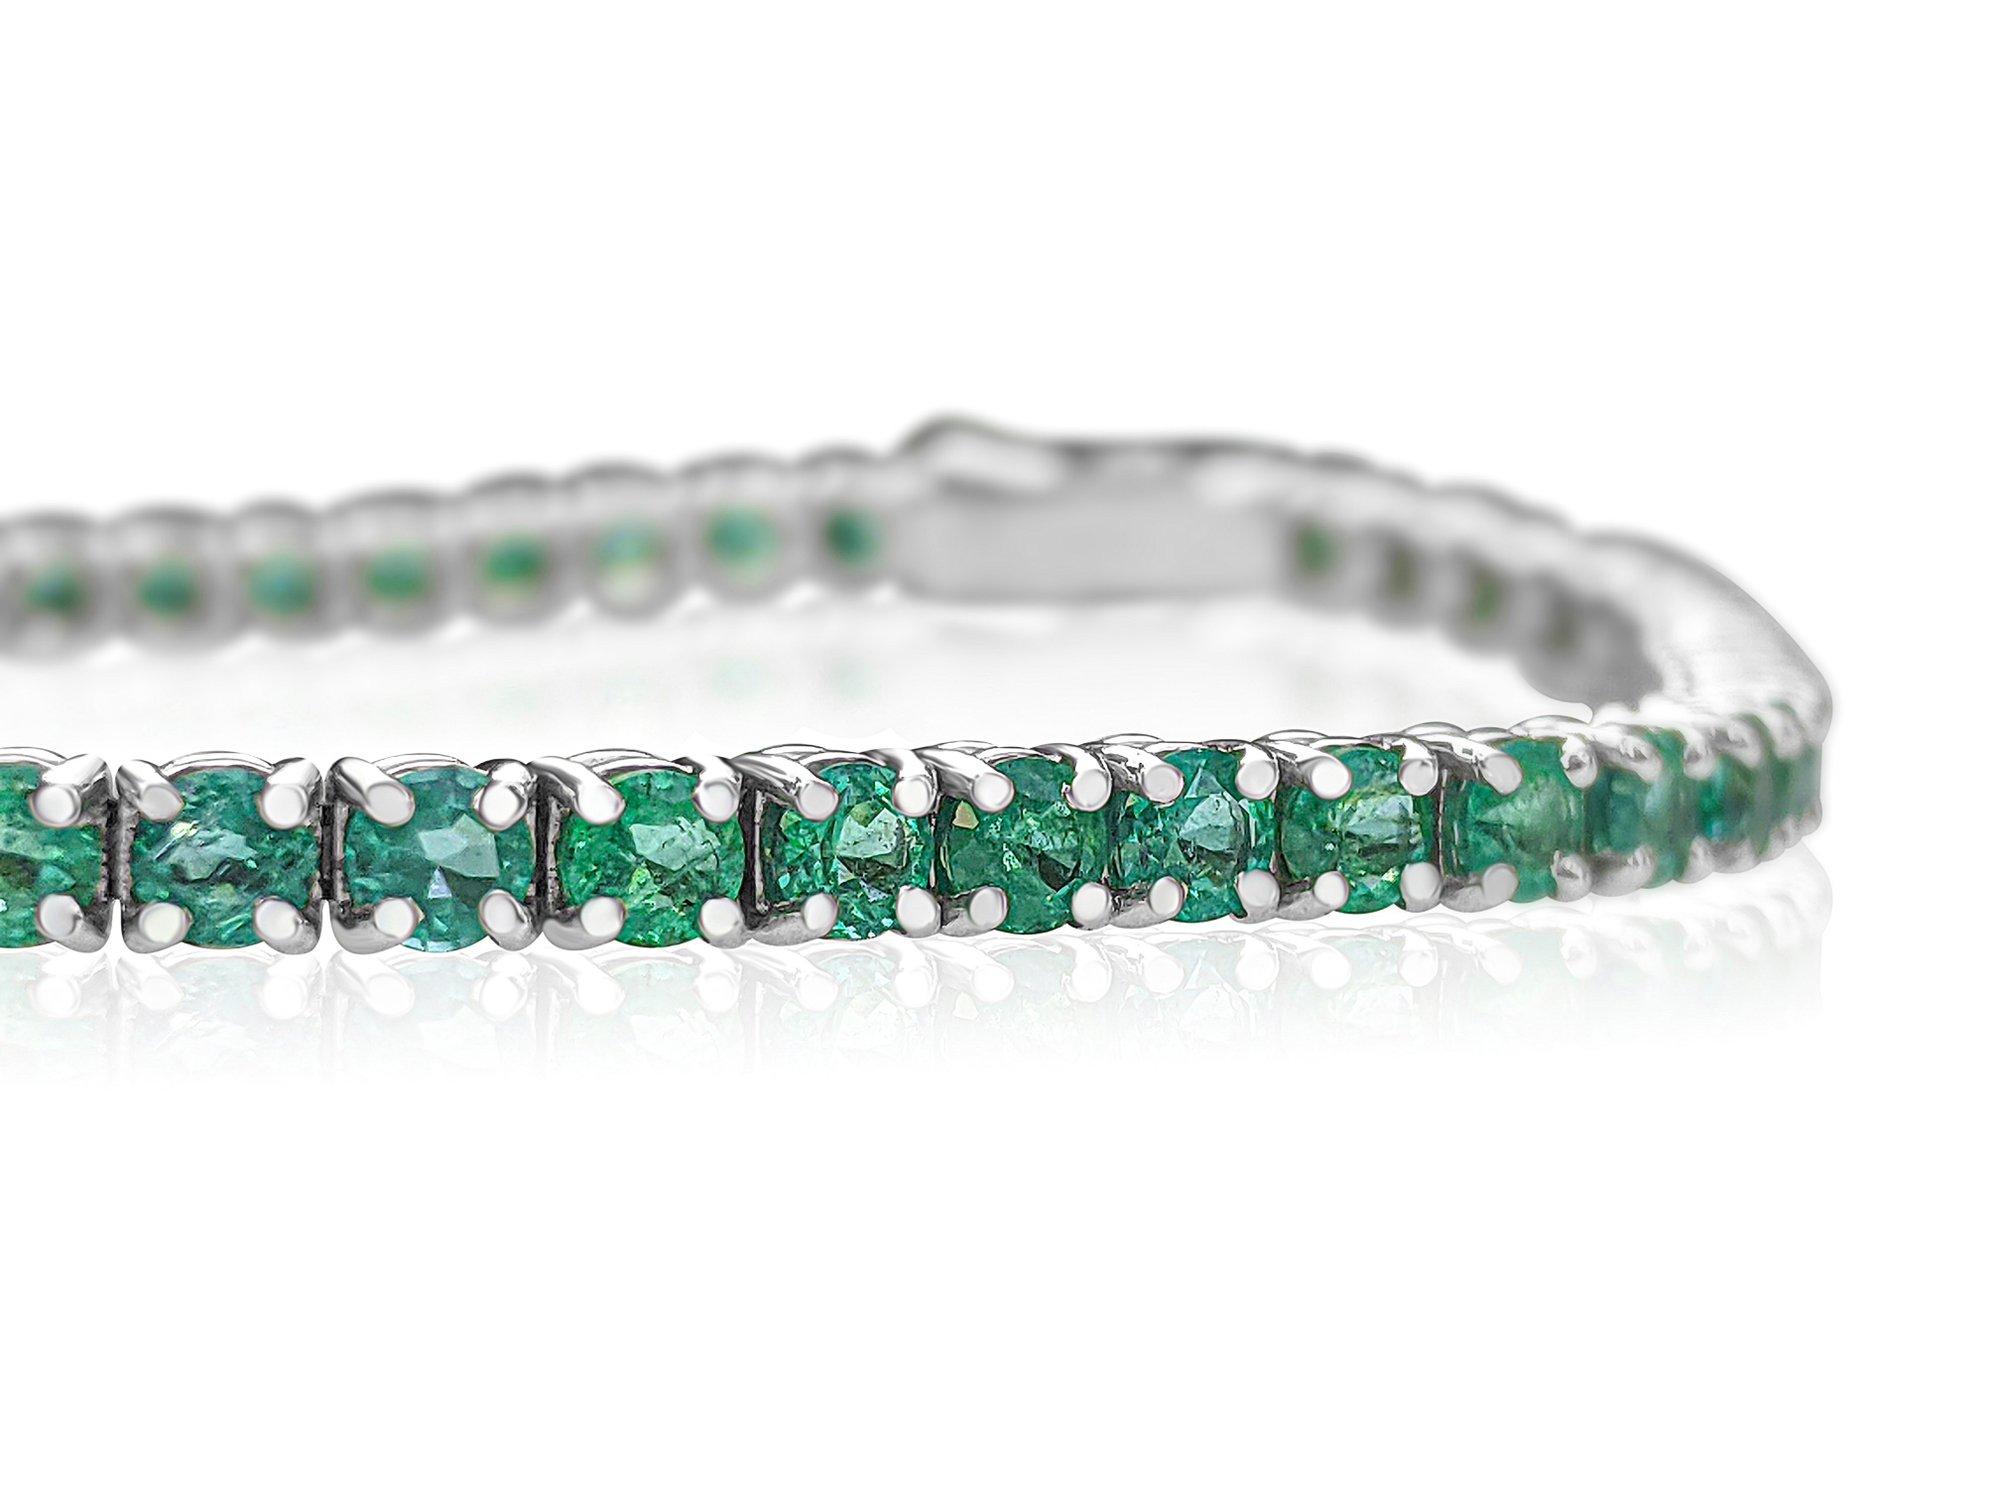 ** In Hong Kong and the USA the VAT is 0%.

A truly one of a kind natural emerald bracelet, set with 62 Round Mixed Cut stones of 5.47 total carat weight!
The bracelet will stand out in any occasion and is a wonderful gift for yourself or your loved